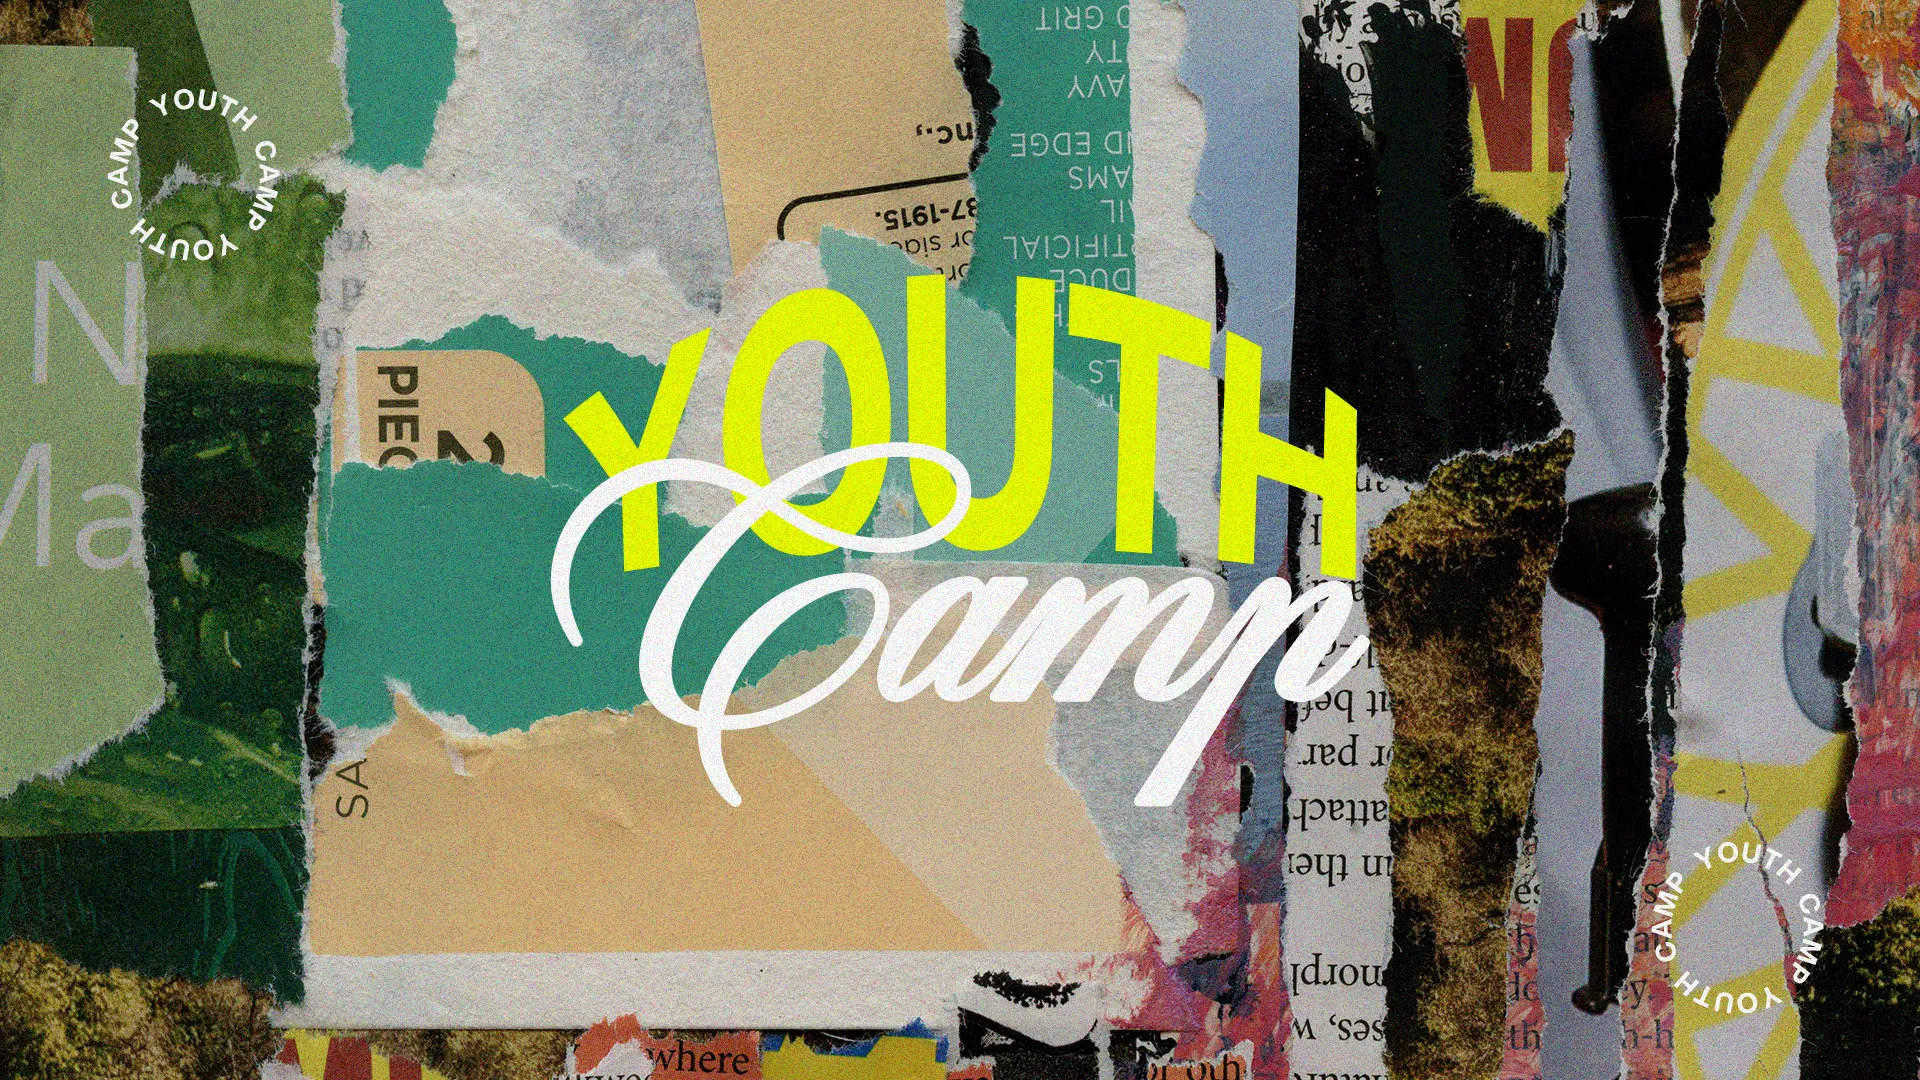 Elevate your church's youth program with this vibrant "Youth Camp" graphic, designed to capture attention and ignite spiritual growth. Its dynamic collage of textures and bright colors perfectly represents the energetic and transformative experience of summer camp.